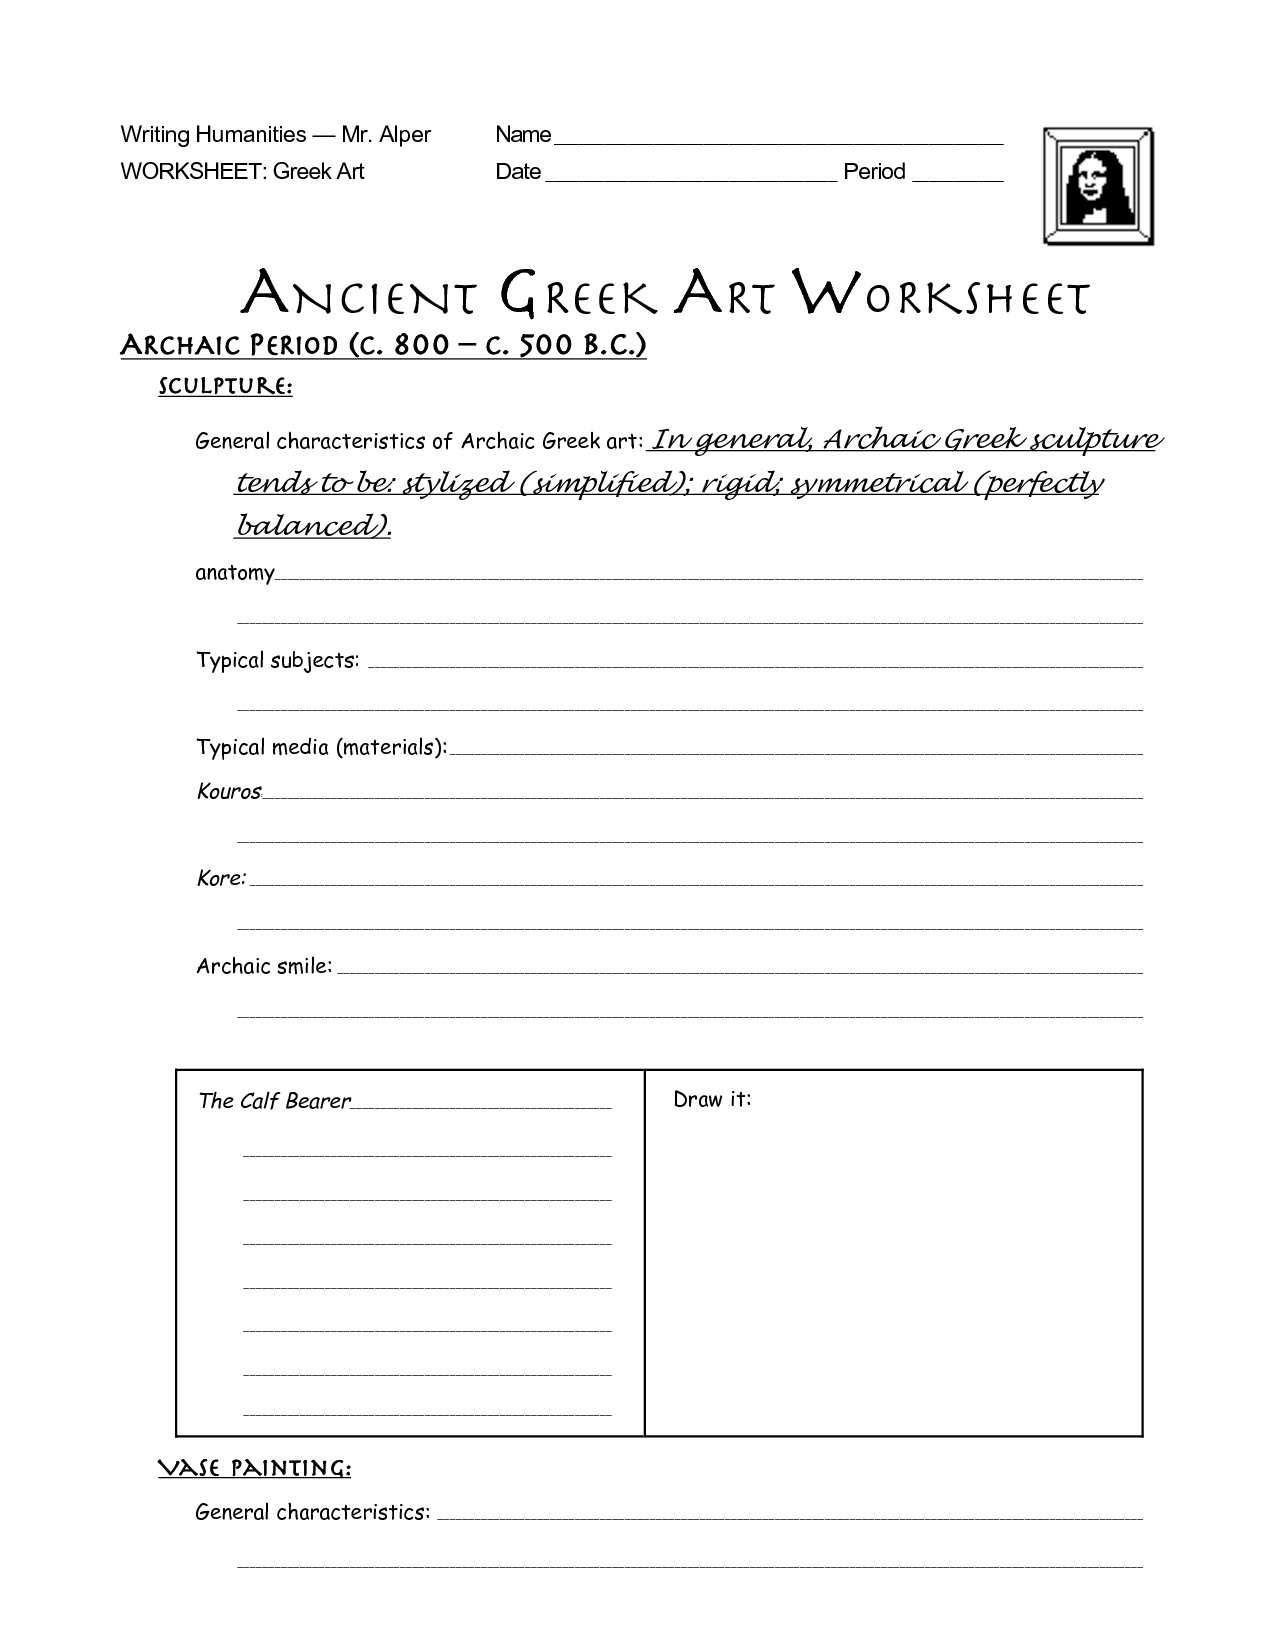 15-best-images-of-greece-worksheets-and-activities-ancient-greece-worksheets-ancient-greece